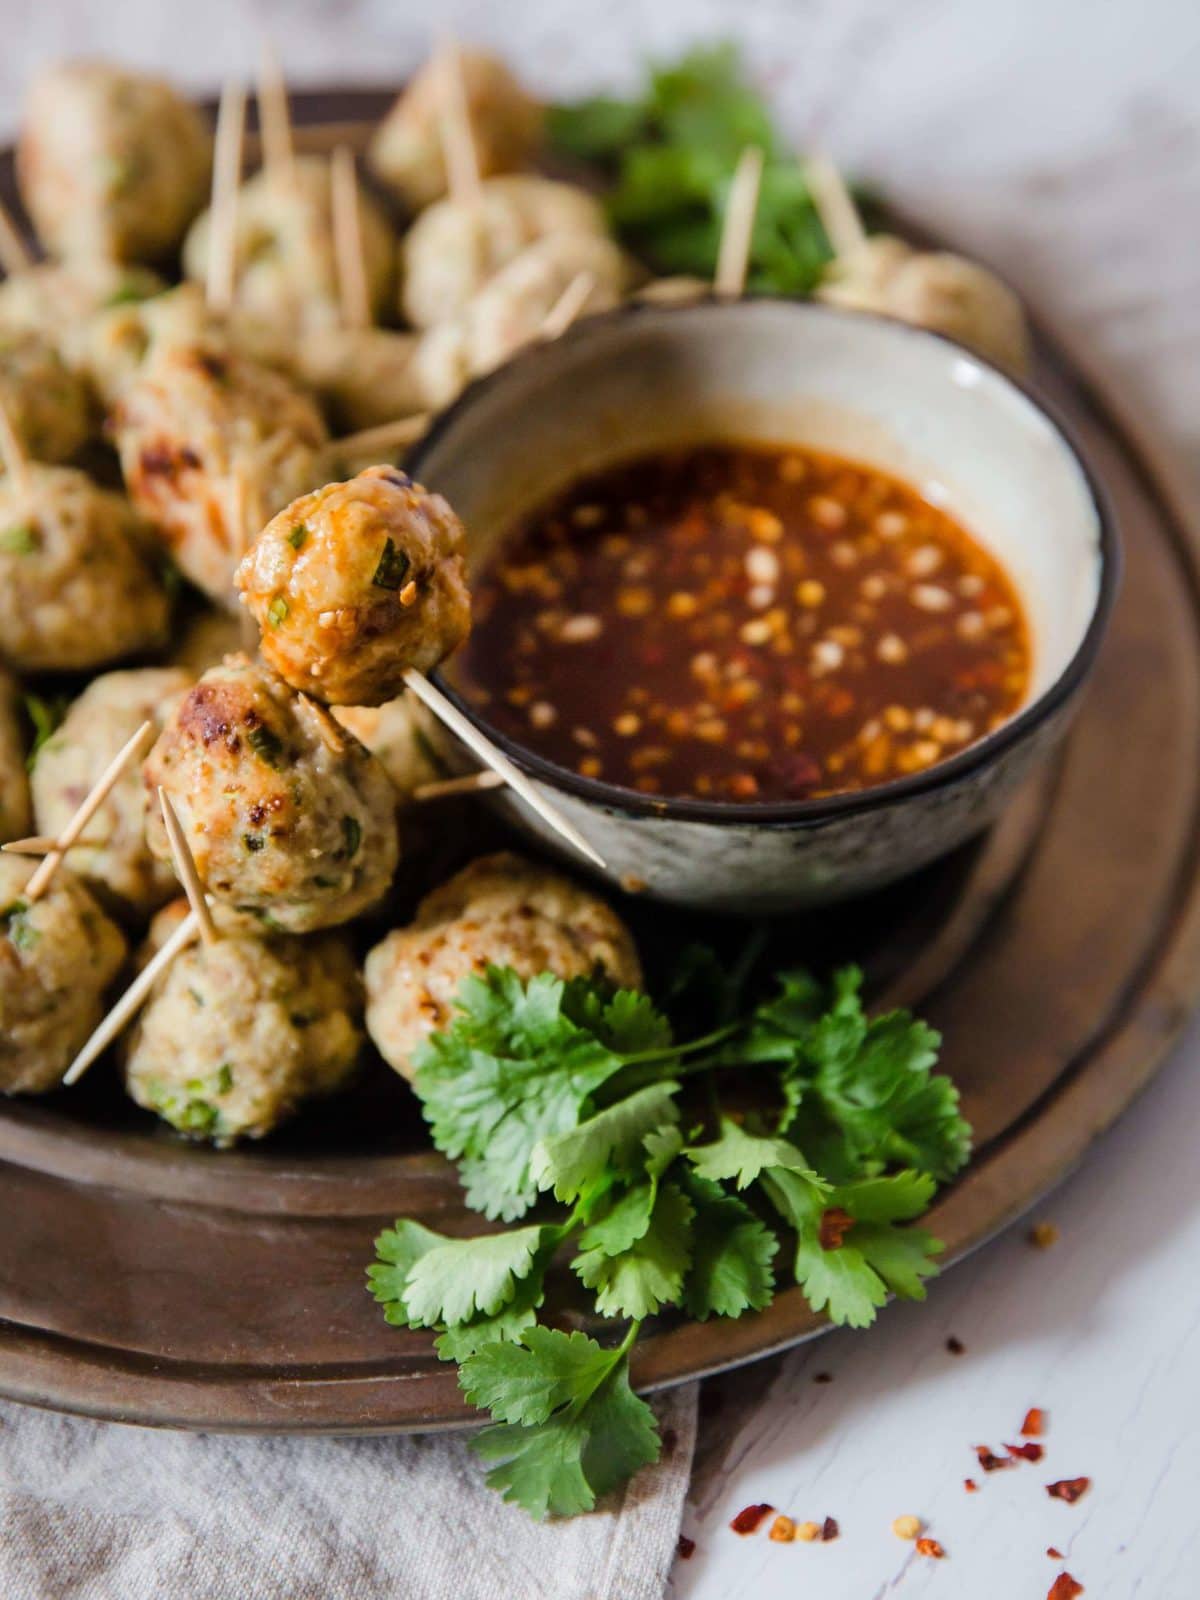 a platter of asian meatballs, served with dipping sauce and garnished with cilantro and red pepper flakes